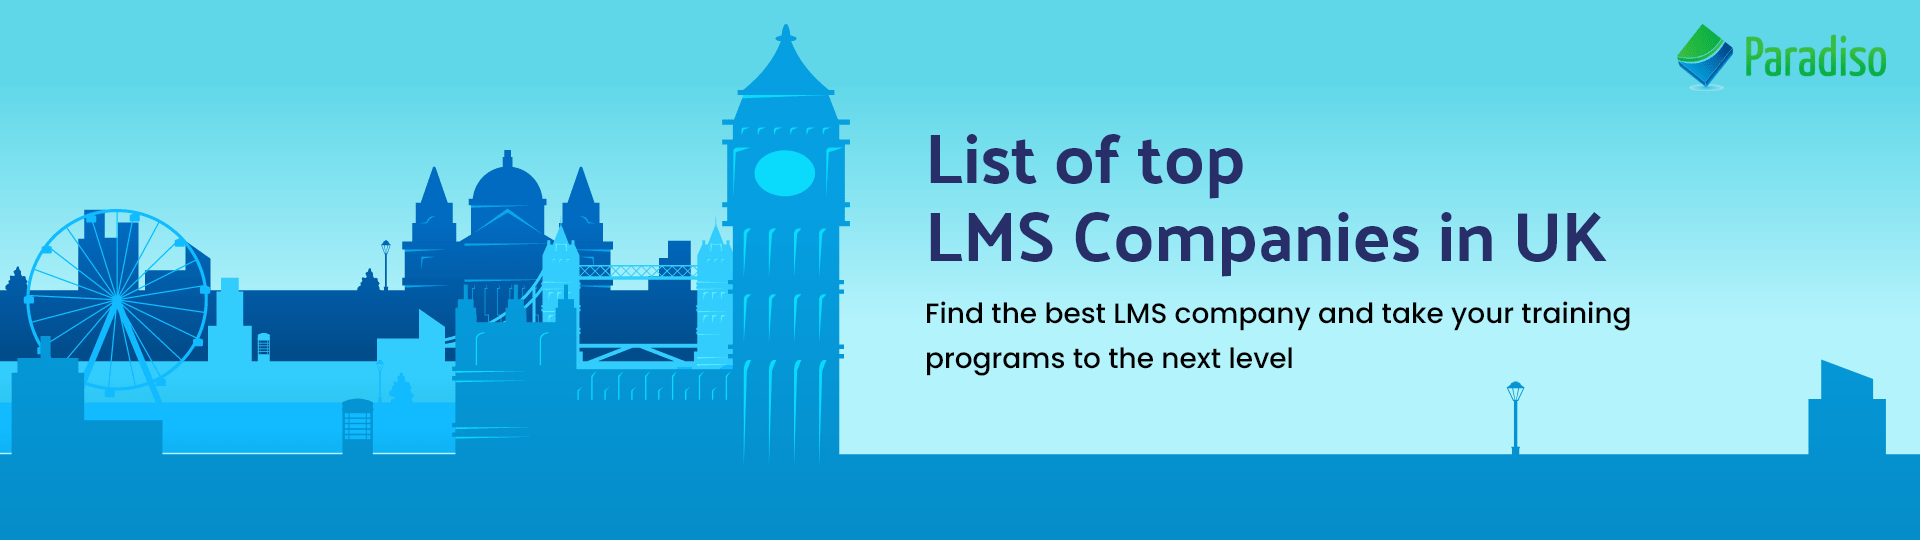 List of top LMS companies in UK